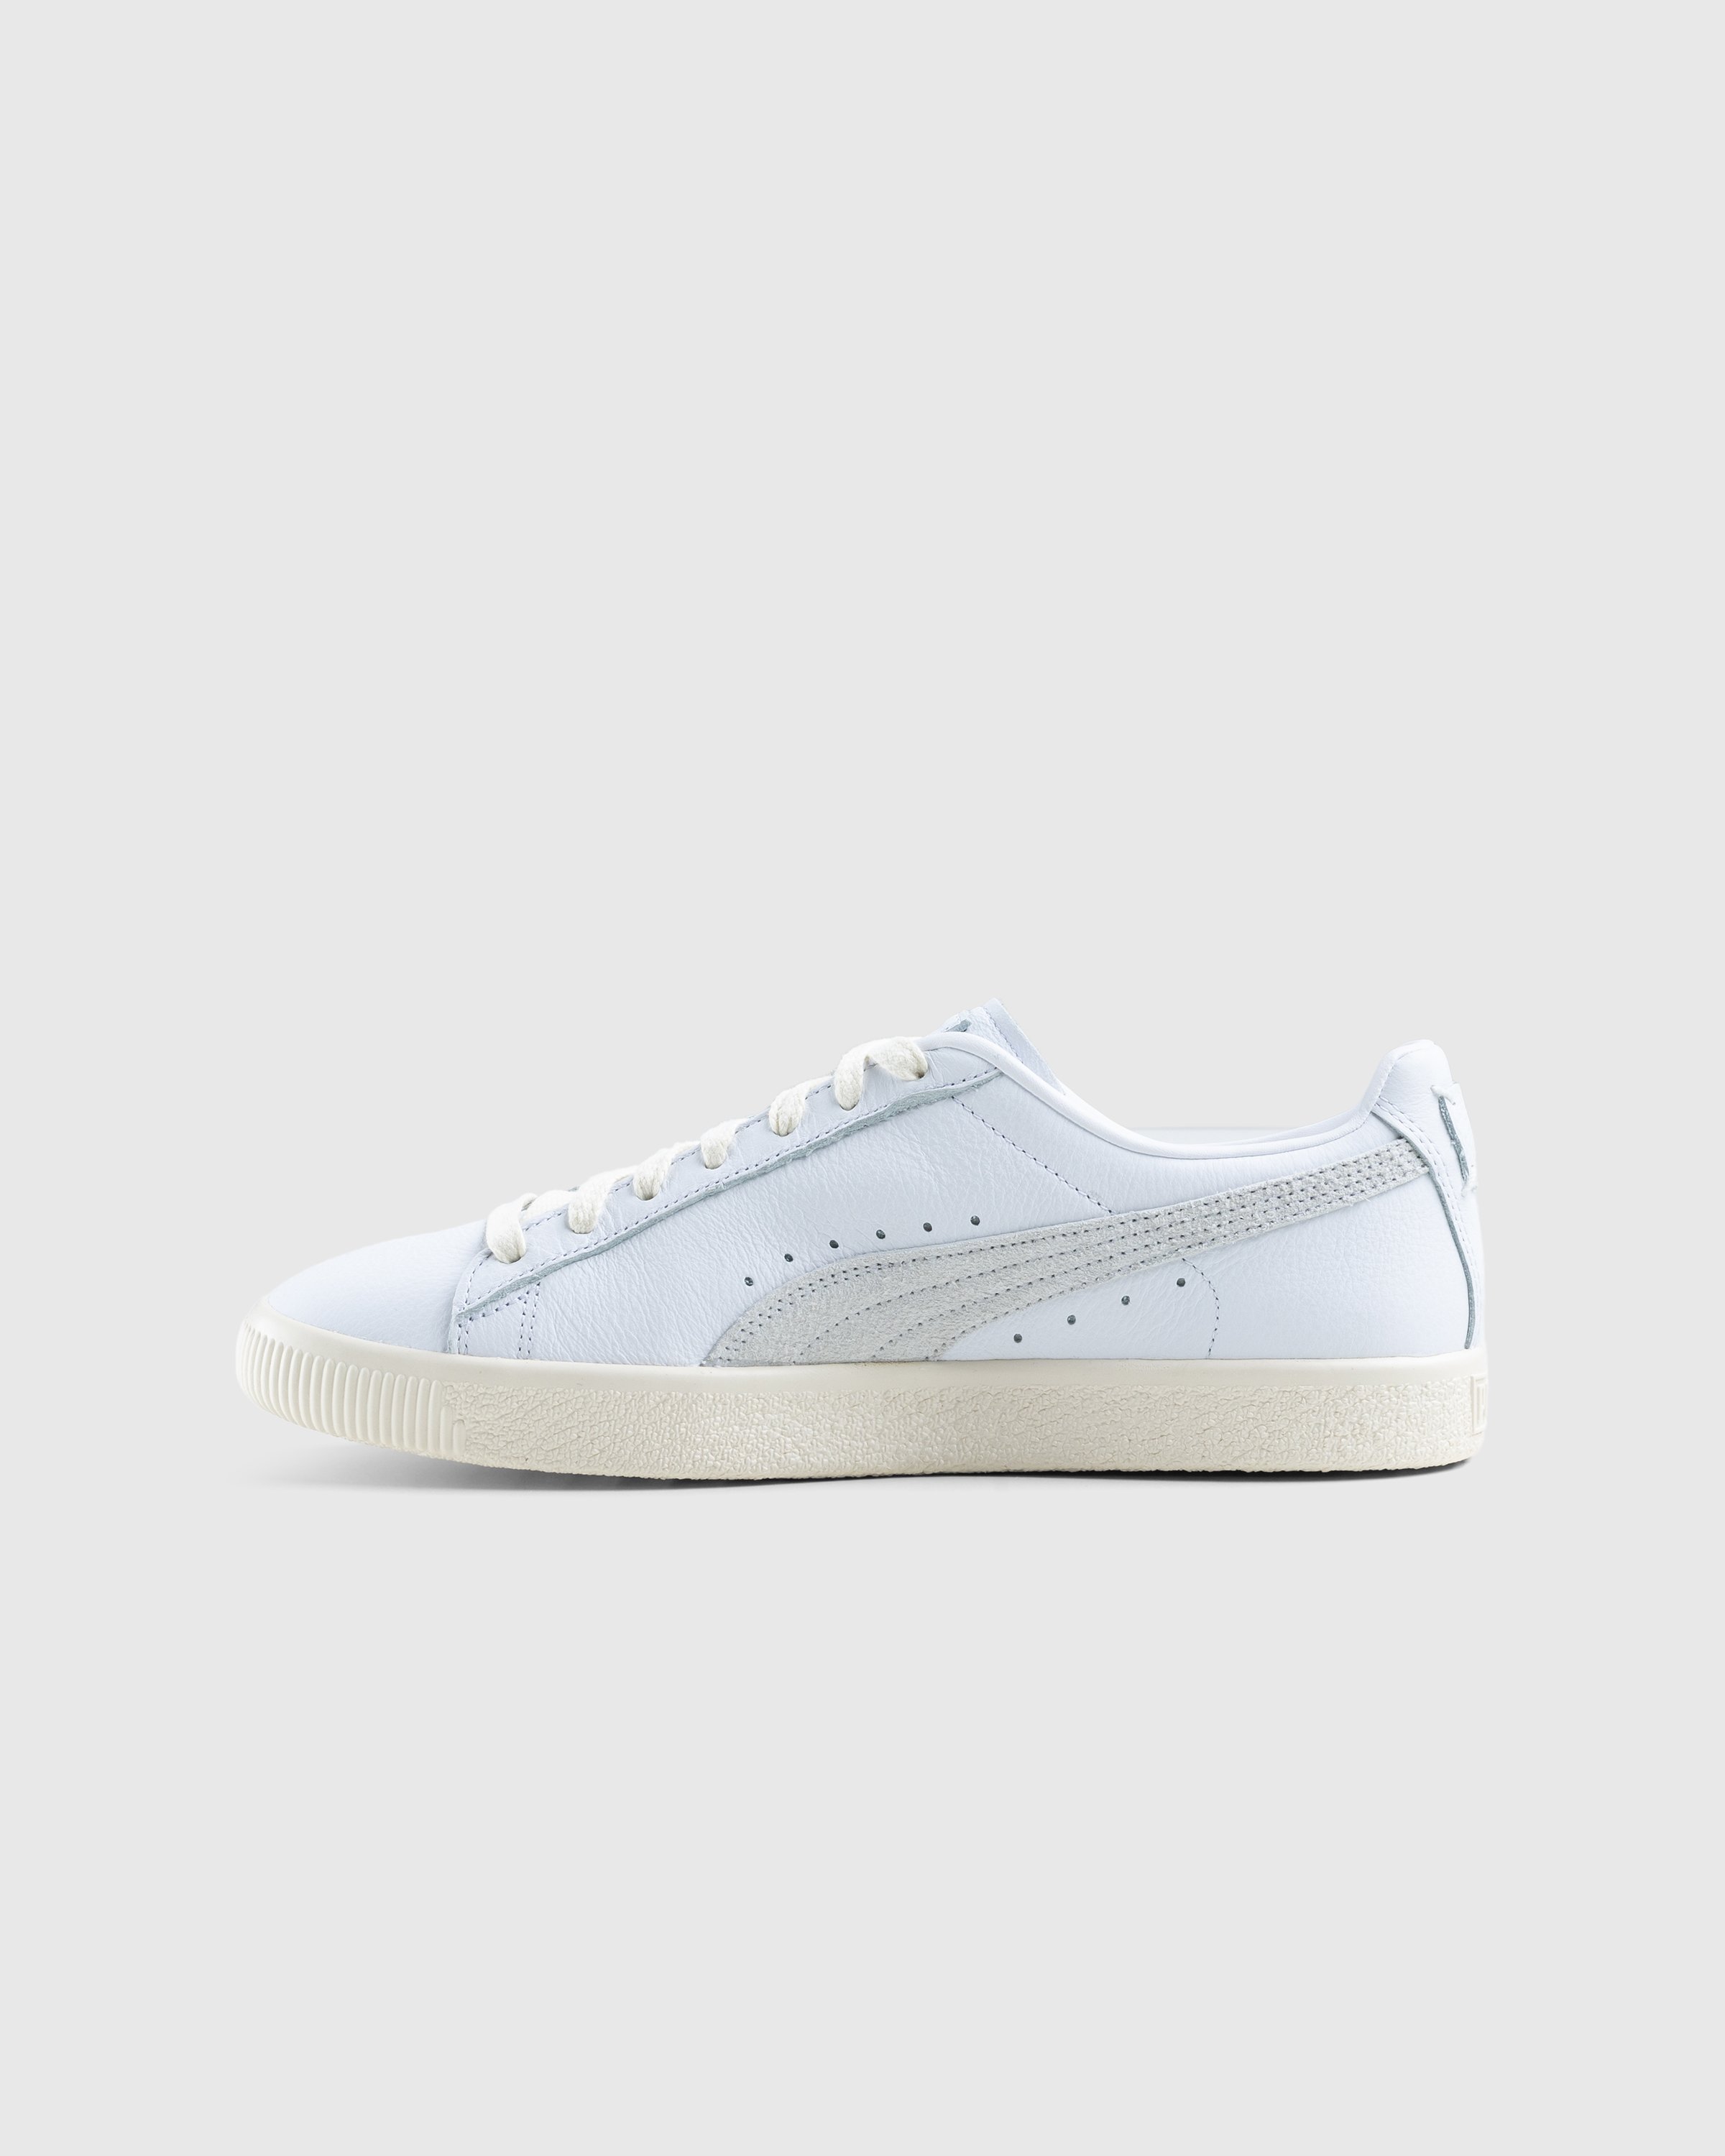 Puma - Clyde Base White - Footwear - White - Image 2